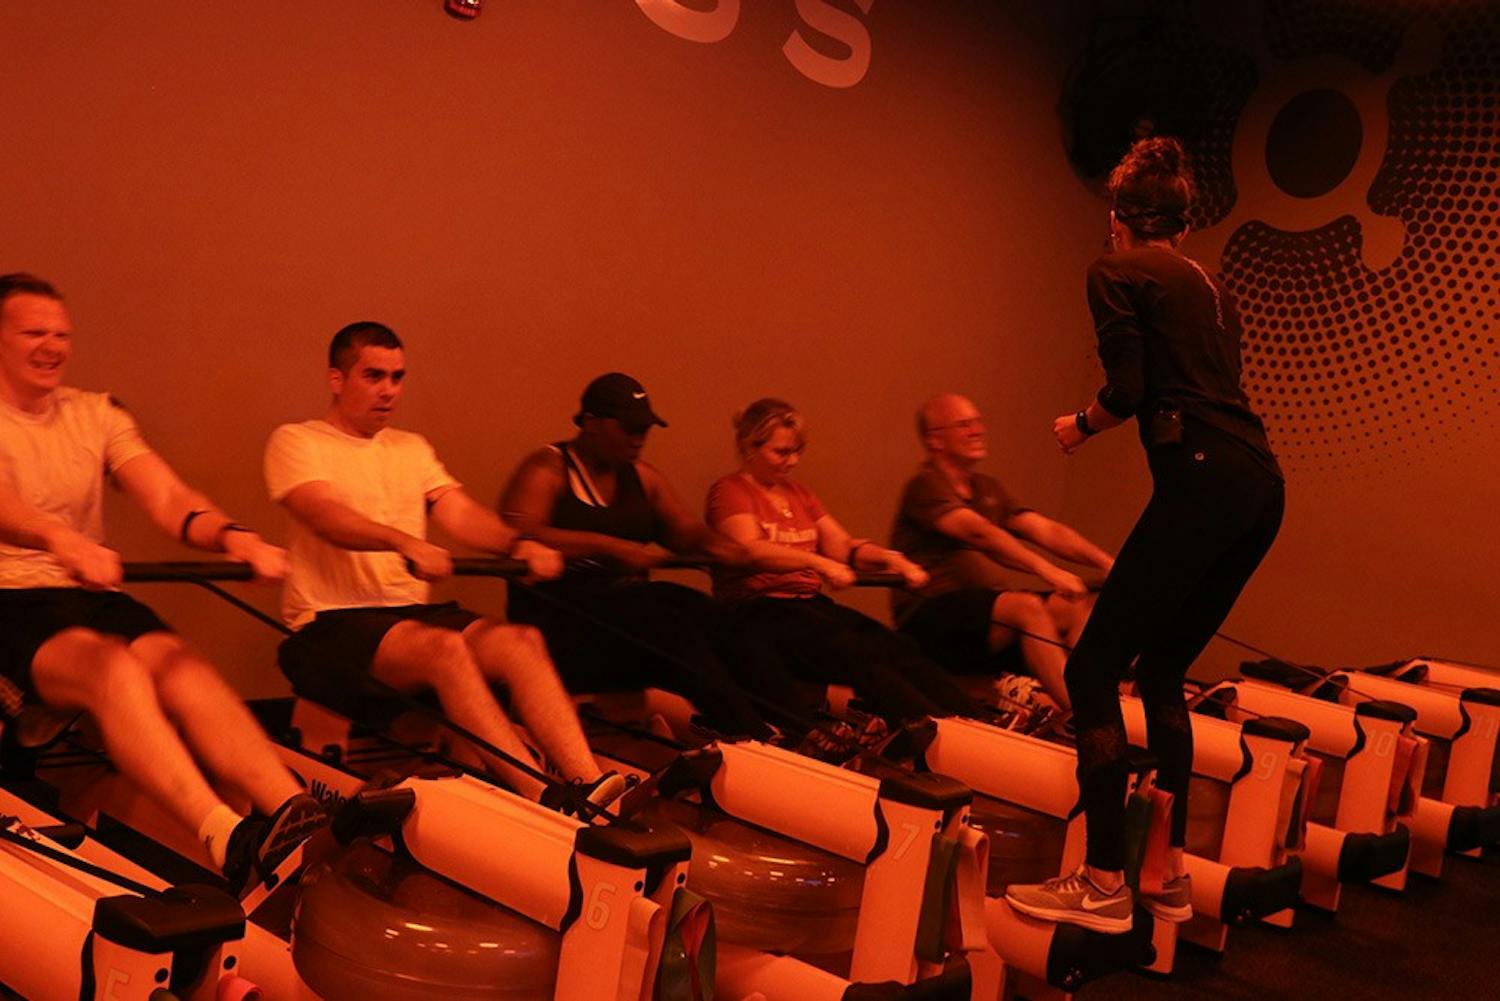 GALLERY: While the rest of the world sleeps, Orangetheory works out